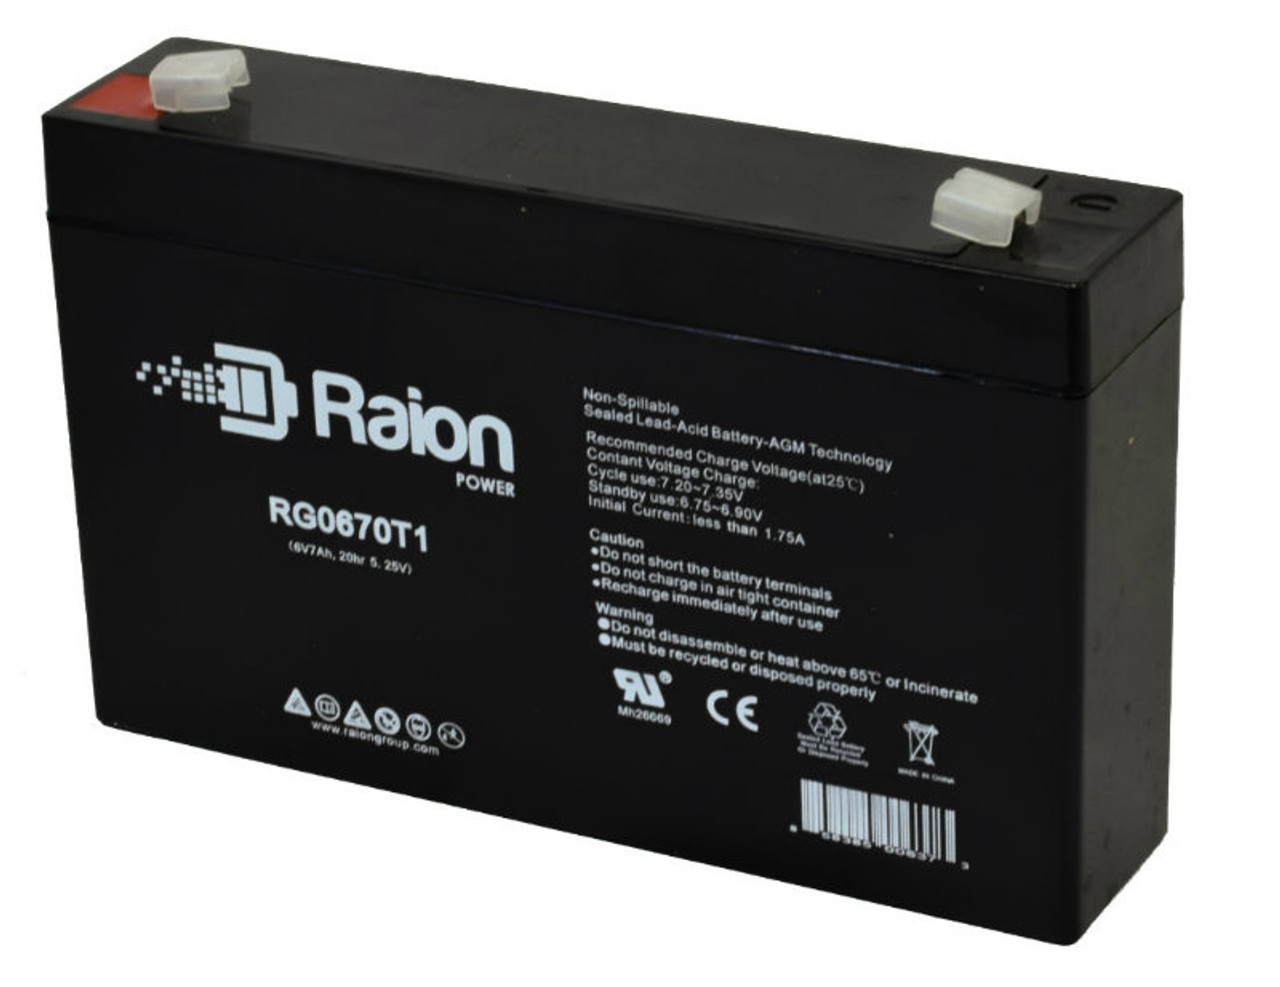 Raion Power RG0670T1 6V 7Ah Replacement Emergency Lighting Battery for Lithonia EP-EL